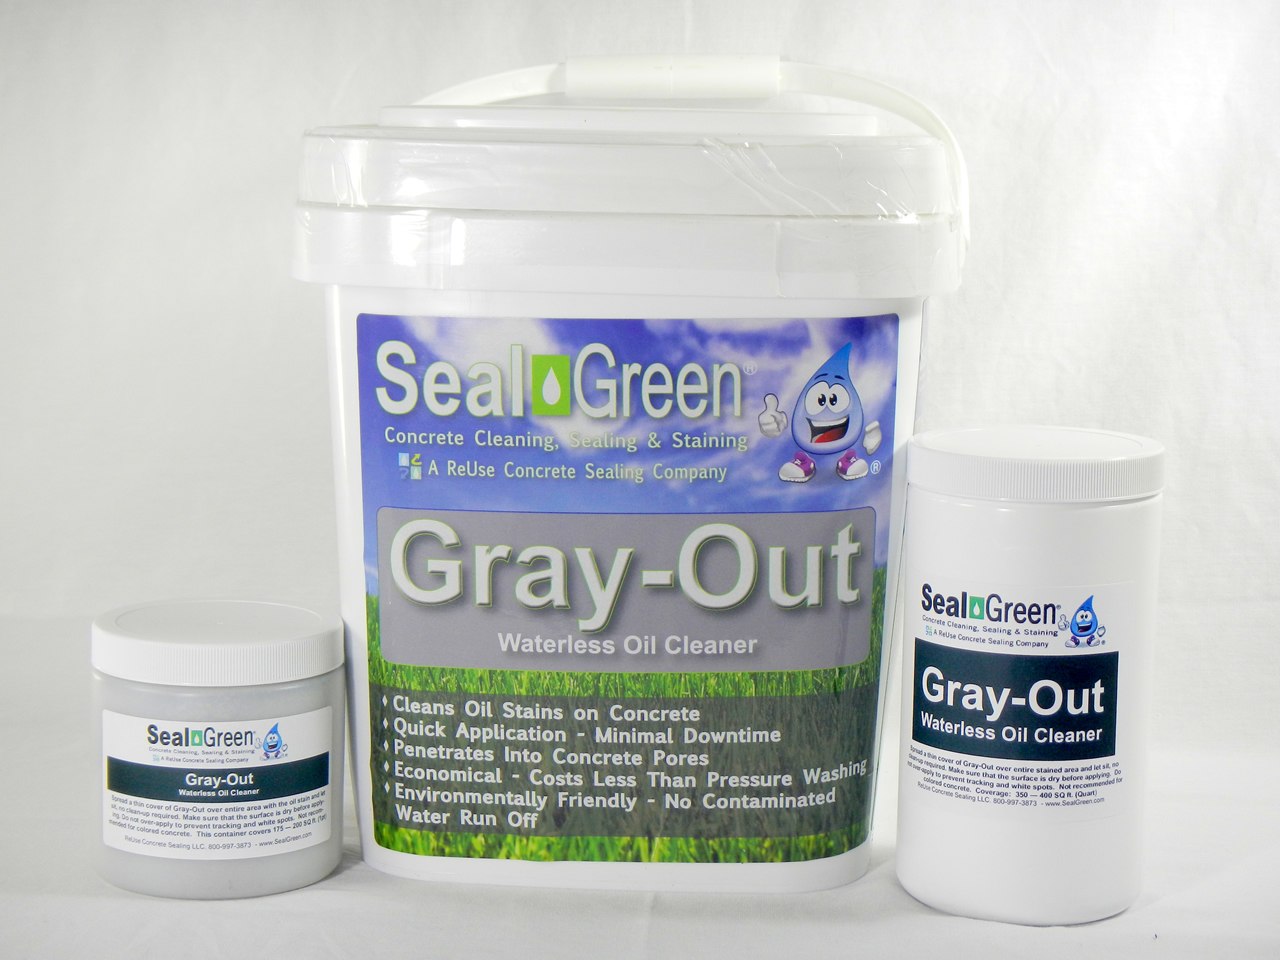 I need to know where do you sell SealGreen Gray Out?